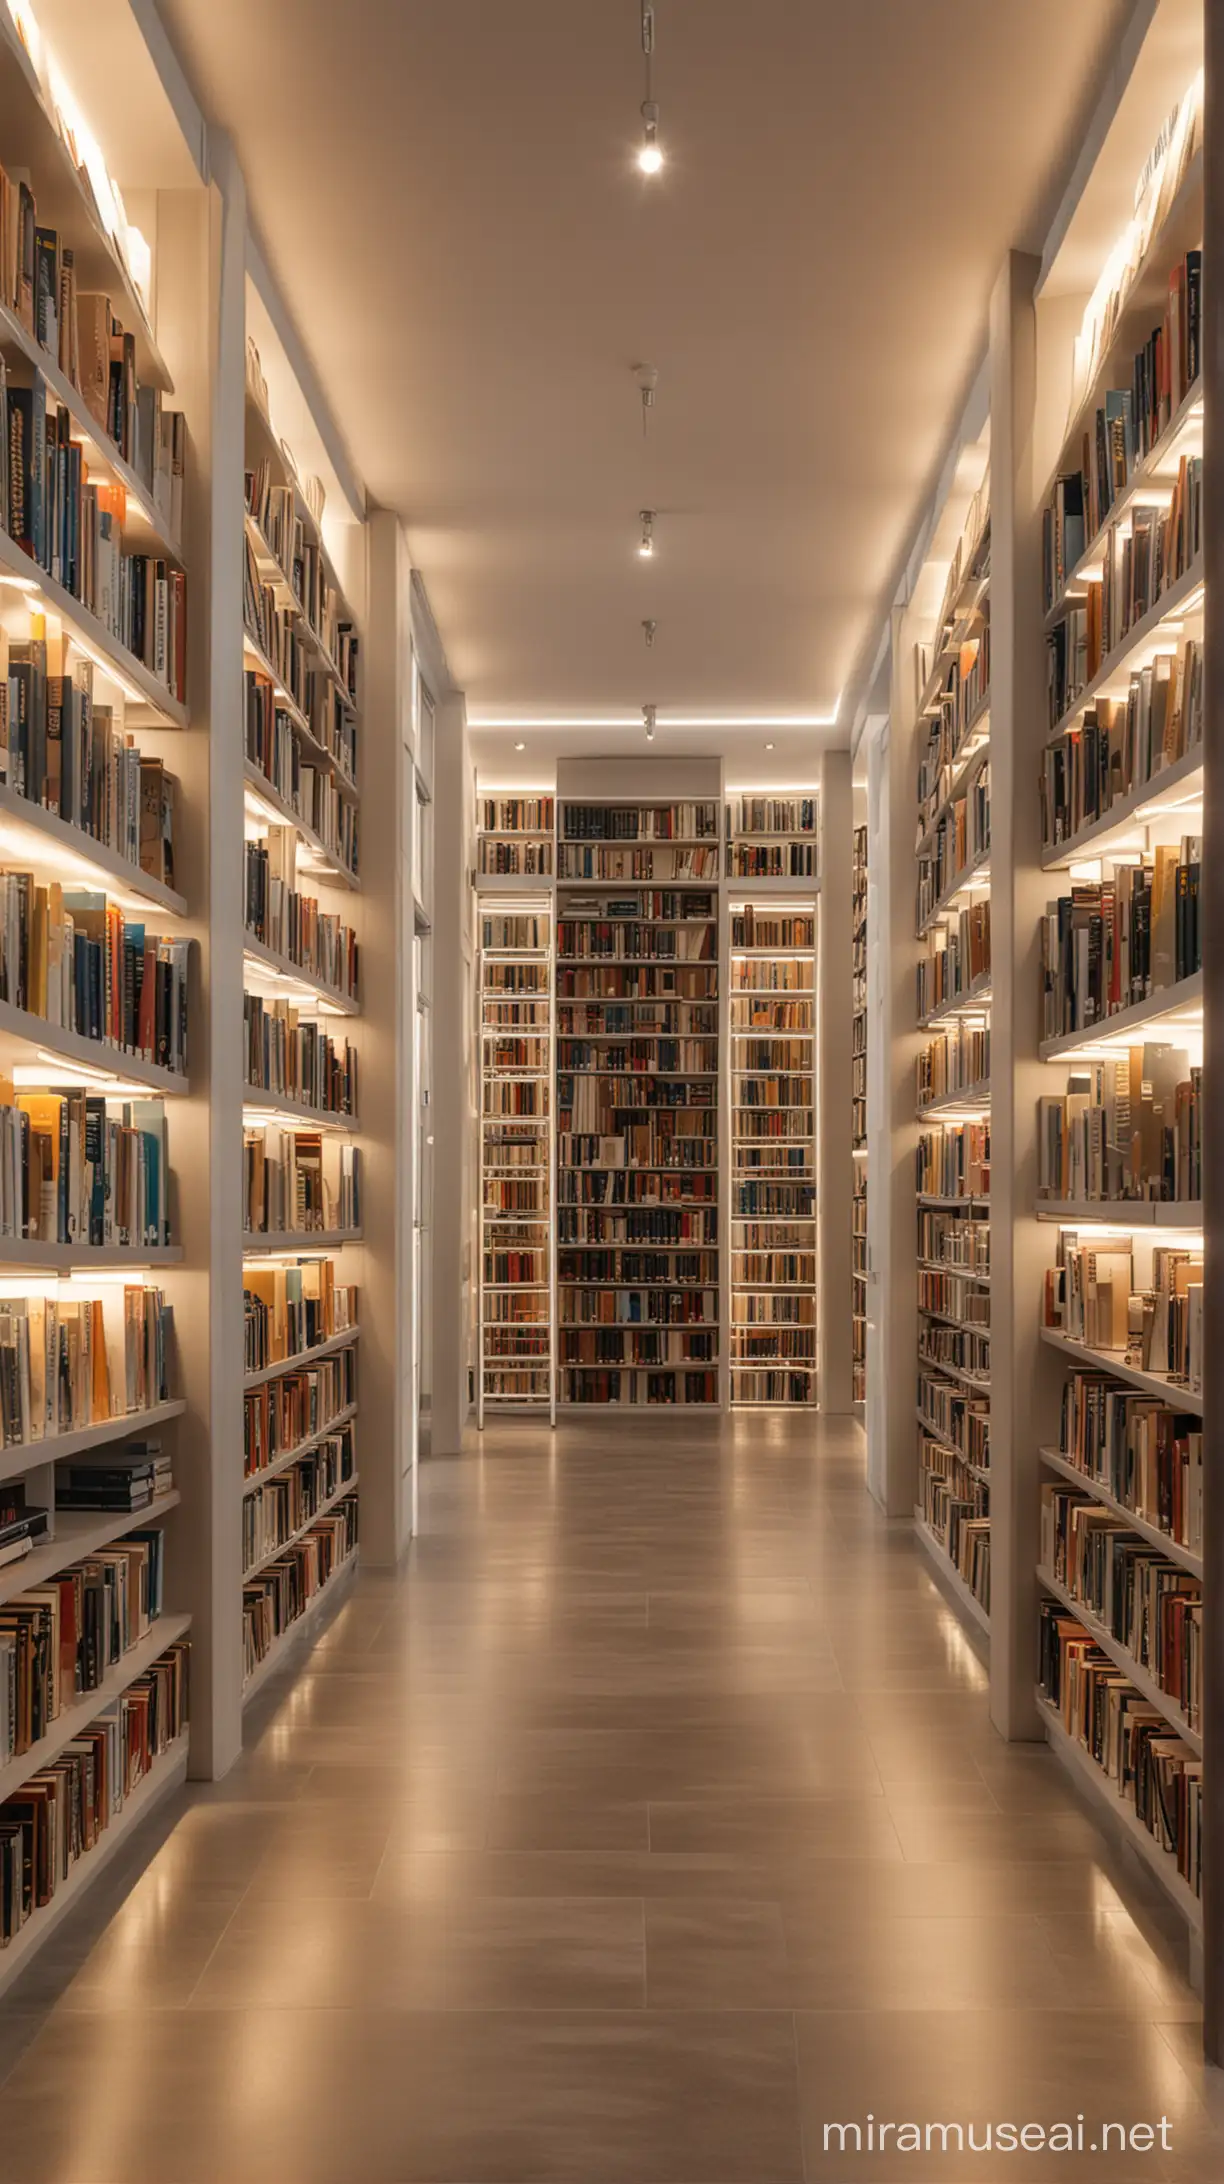 Contemporary Illuminated Library with Bright Aisles and Bookshelves